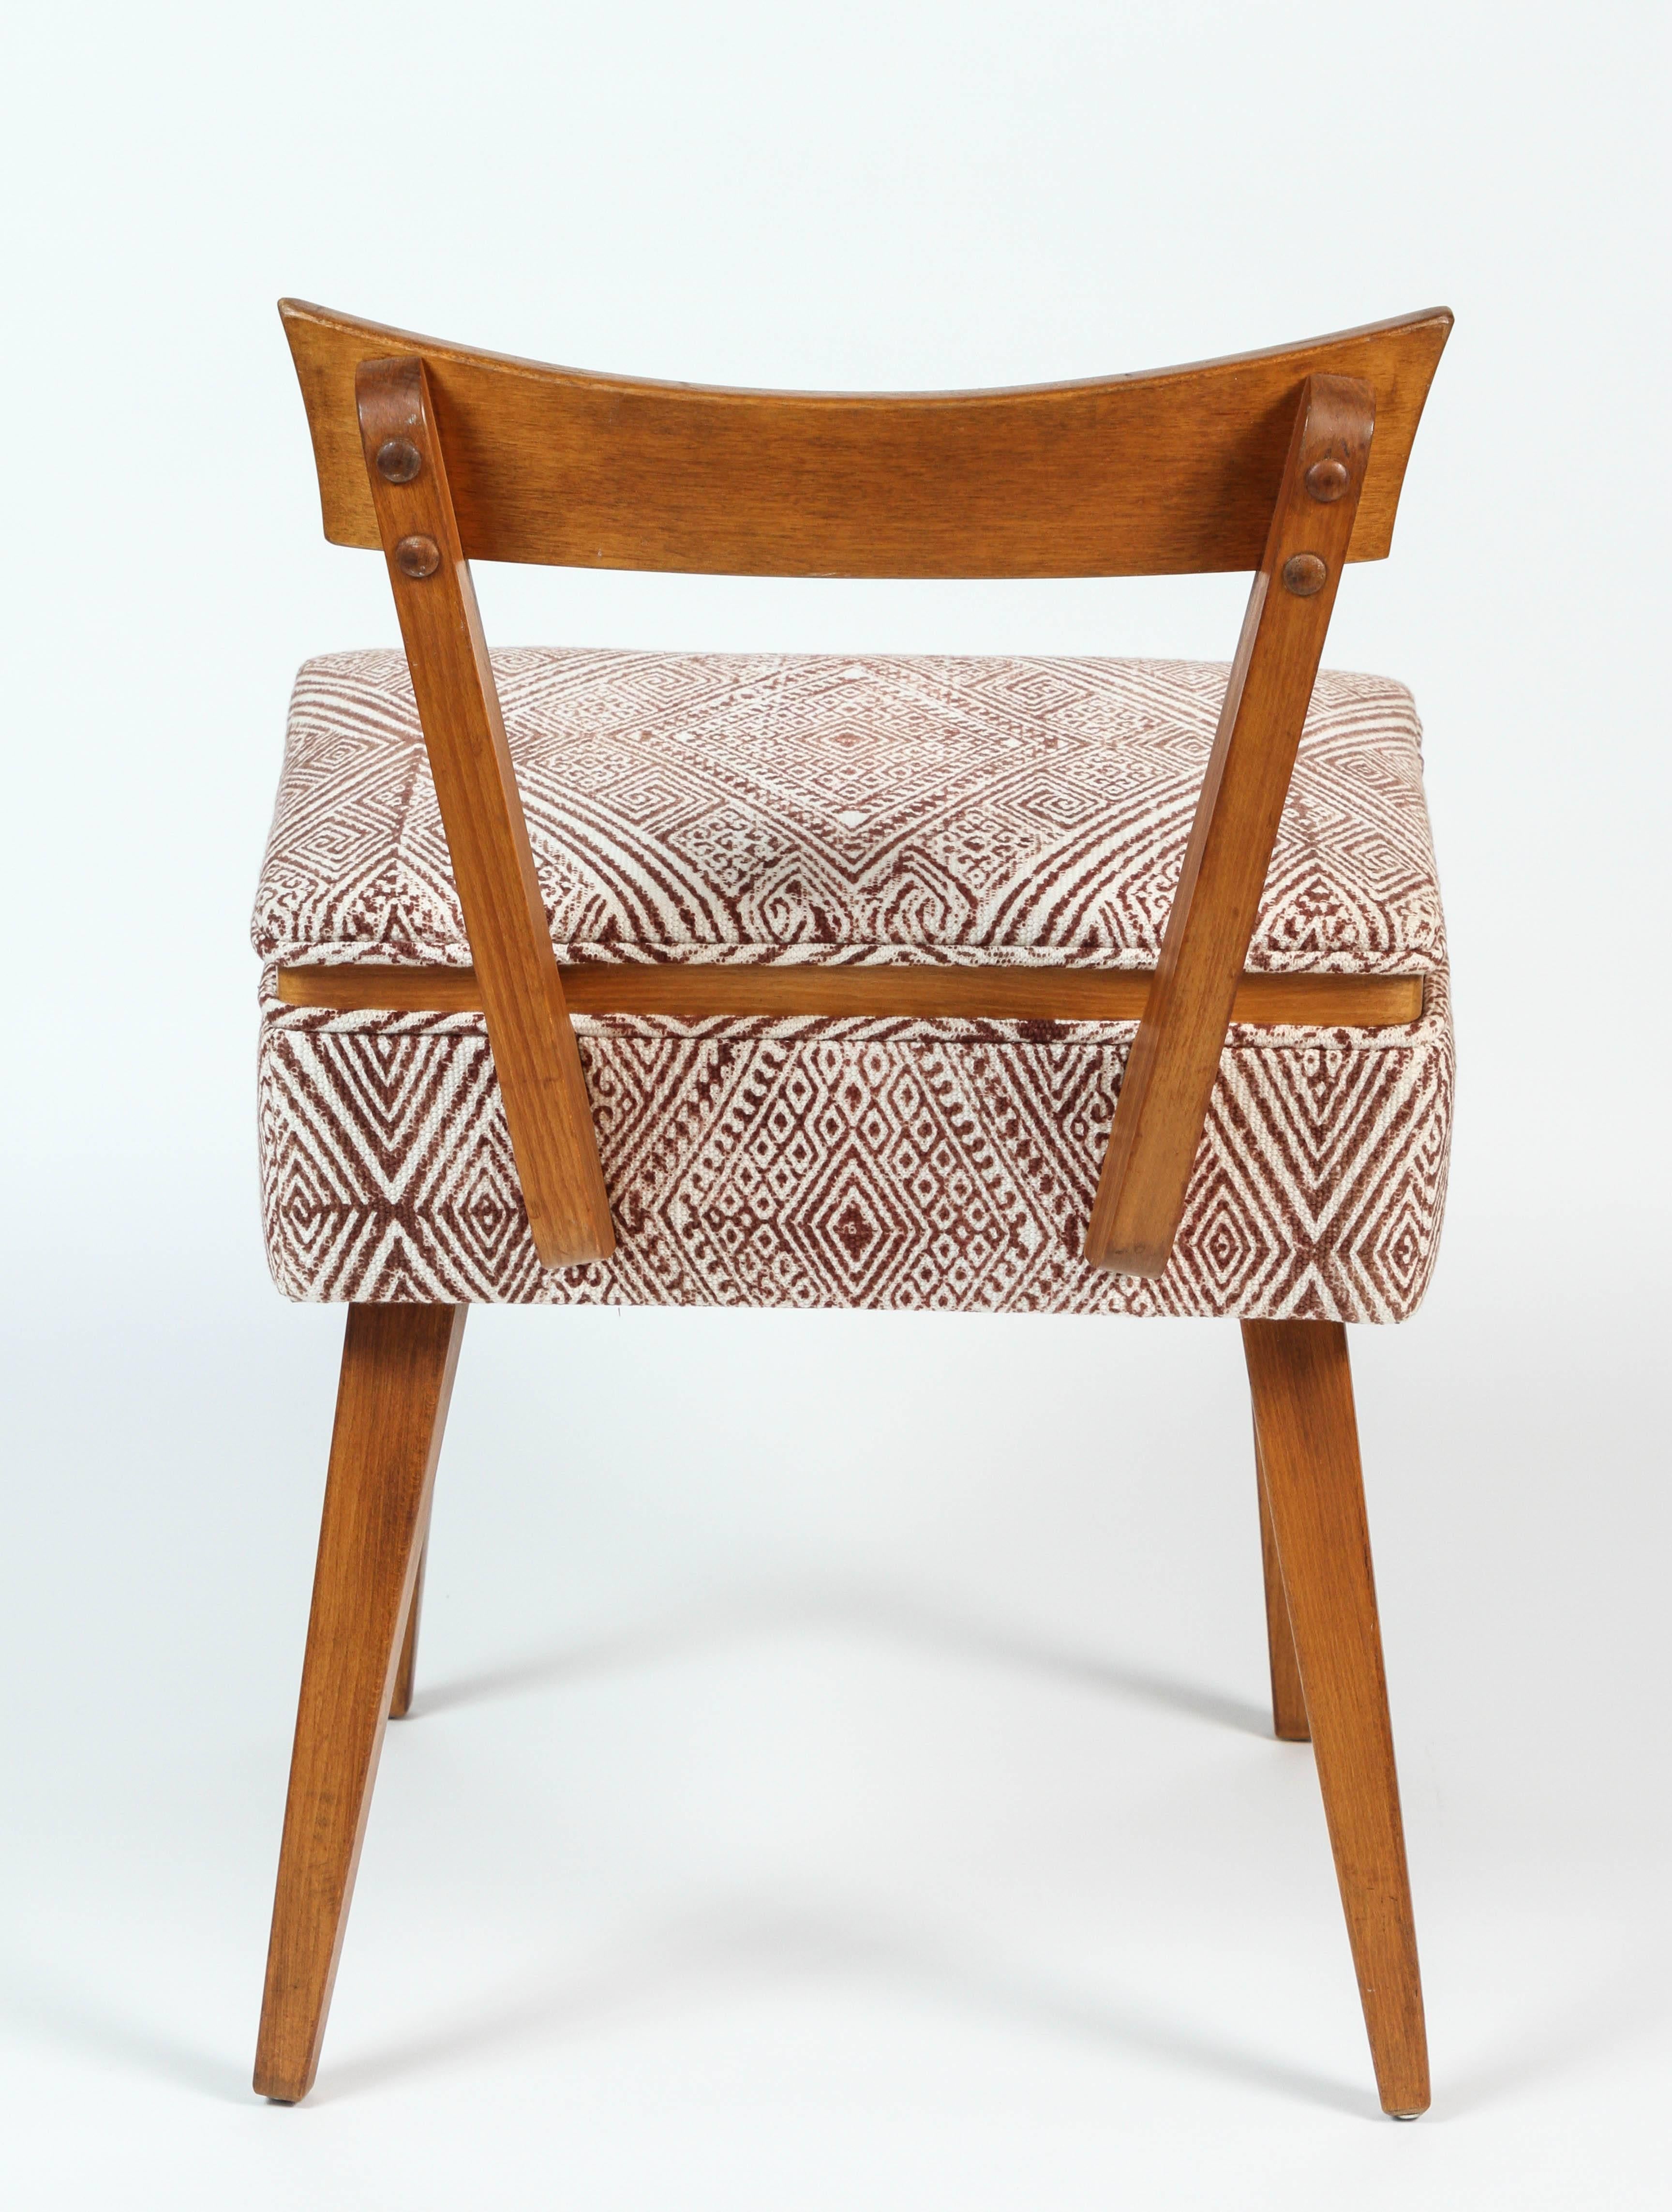 Midcentury Sewing Chair in John Robshaw Fabric 1